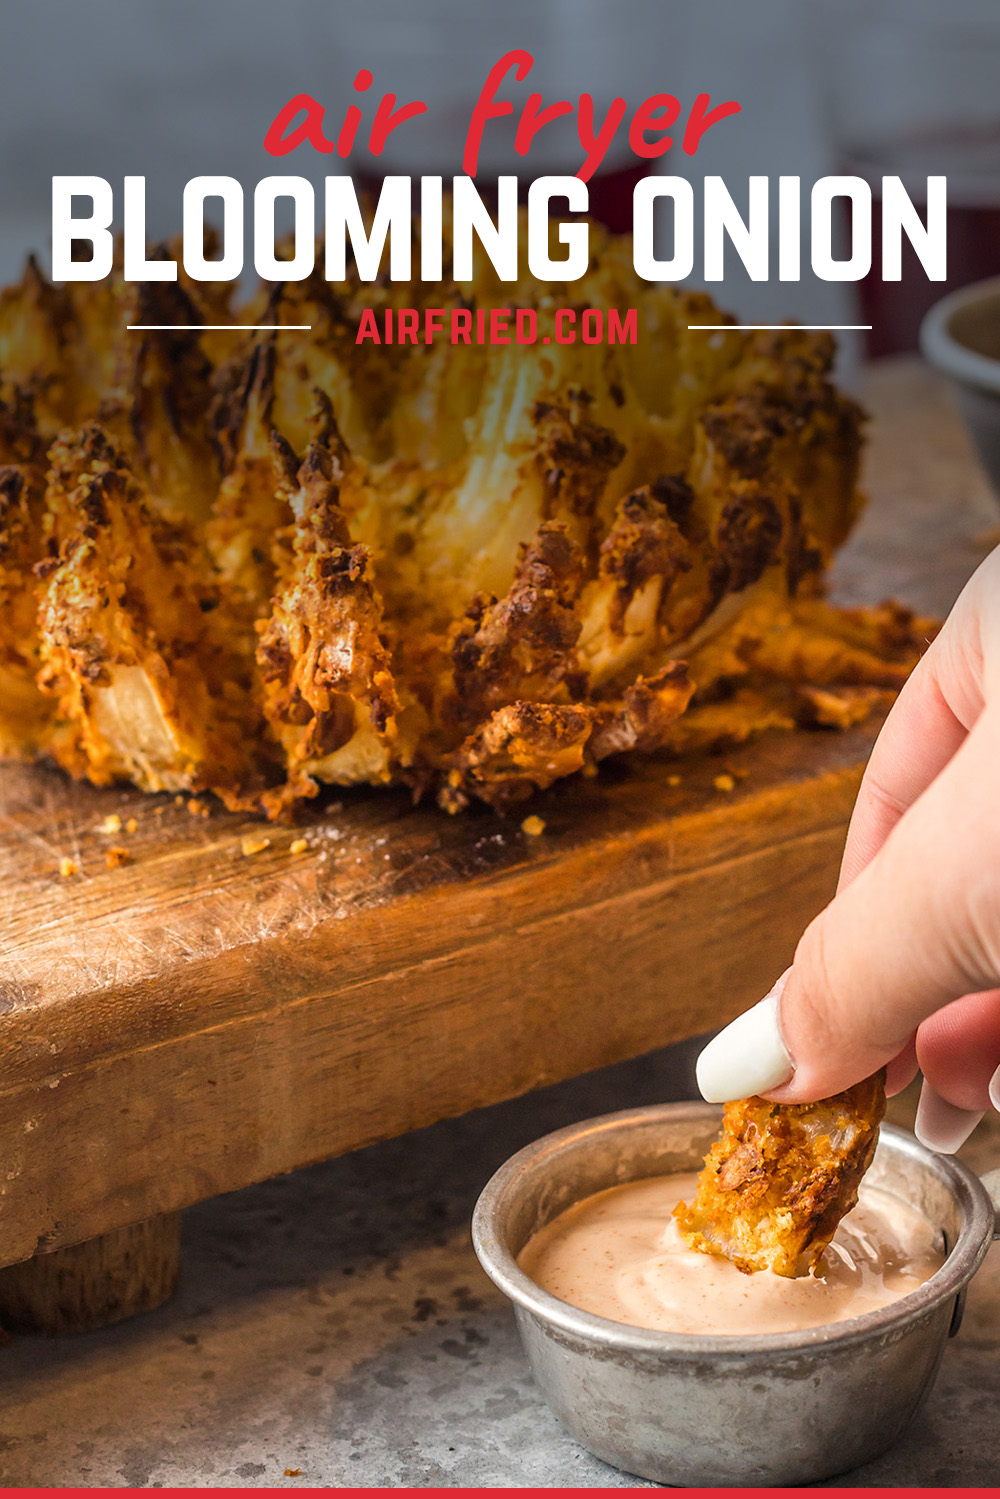 Blooming onions from the air fryer are crispy and delicious!  Try them in our homemade dipping sauce!  #recipes #appetizers #airfried